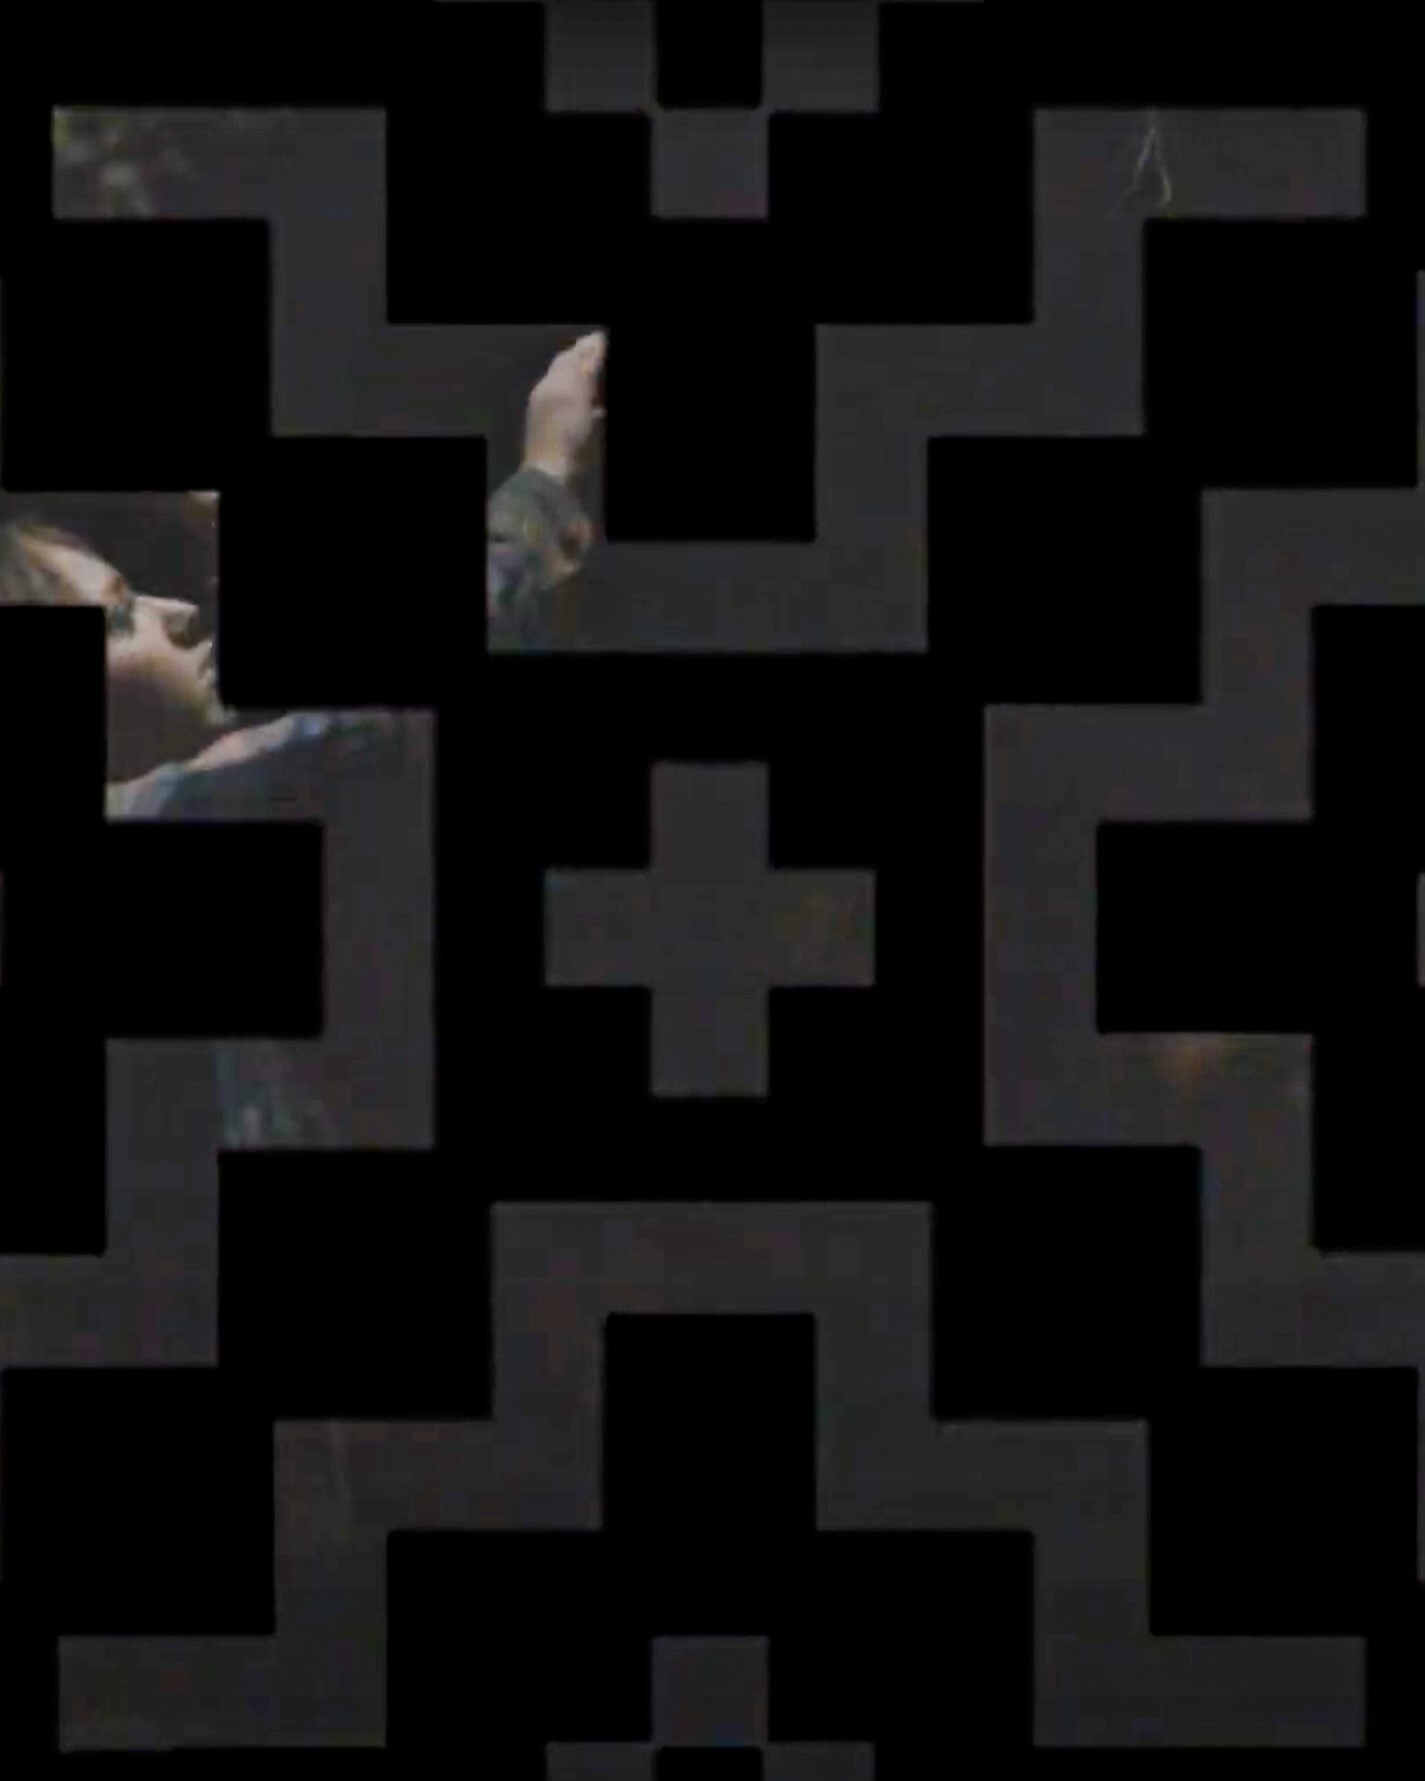 Geometric shapes form a grid-like mask across a photo of someone reaching up toward a tree. The image is dark. The shapes are black.